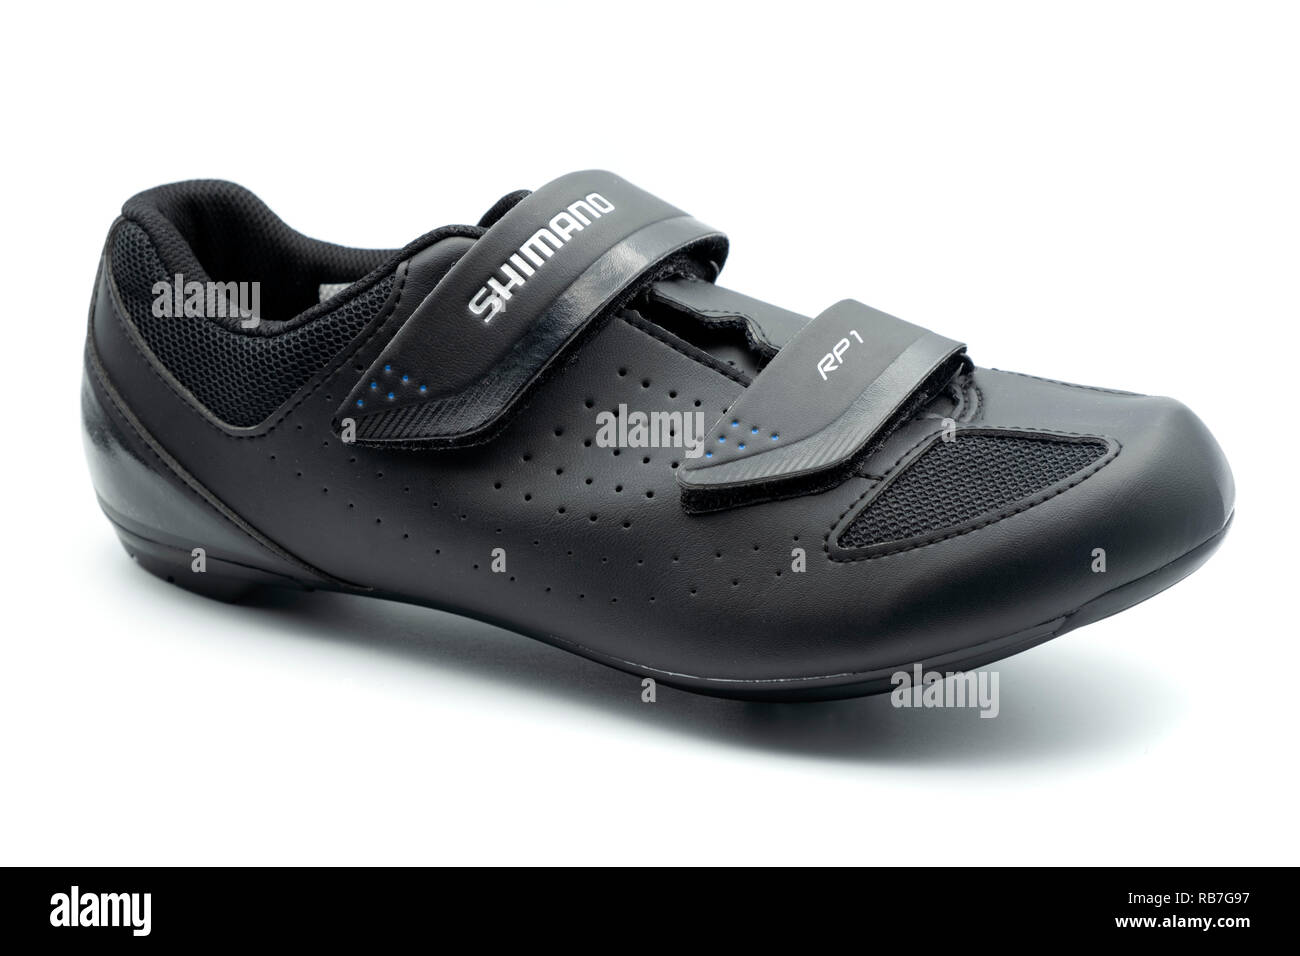 Pair of black Shimano road cycling / spinning class shoes Stock Photo